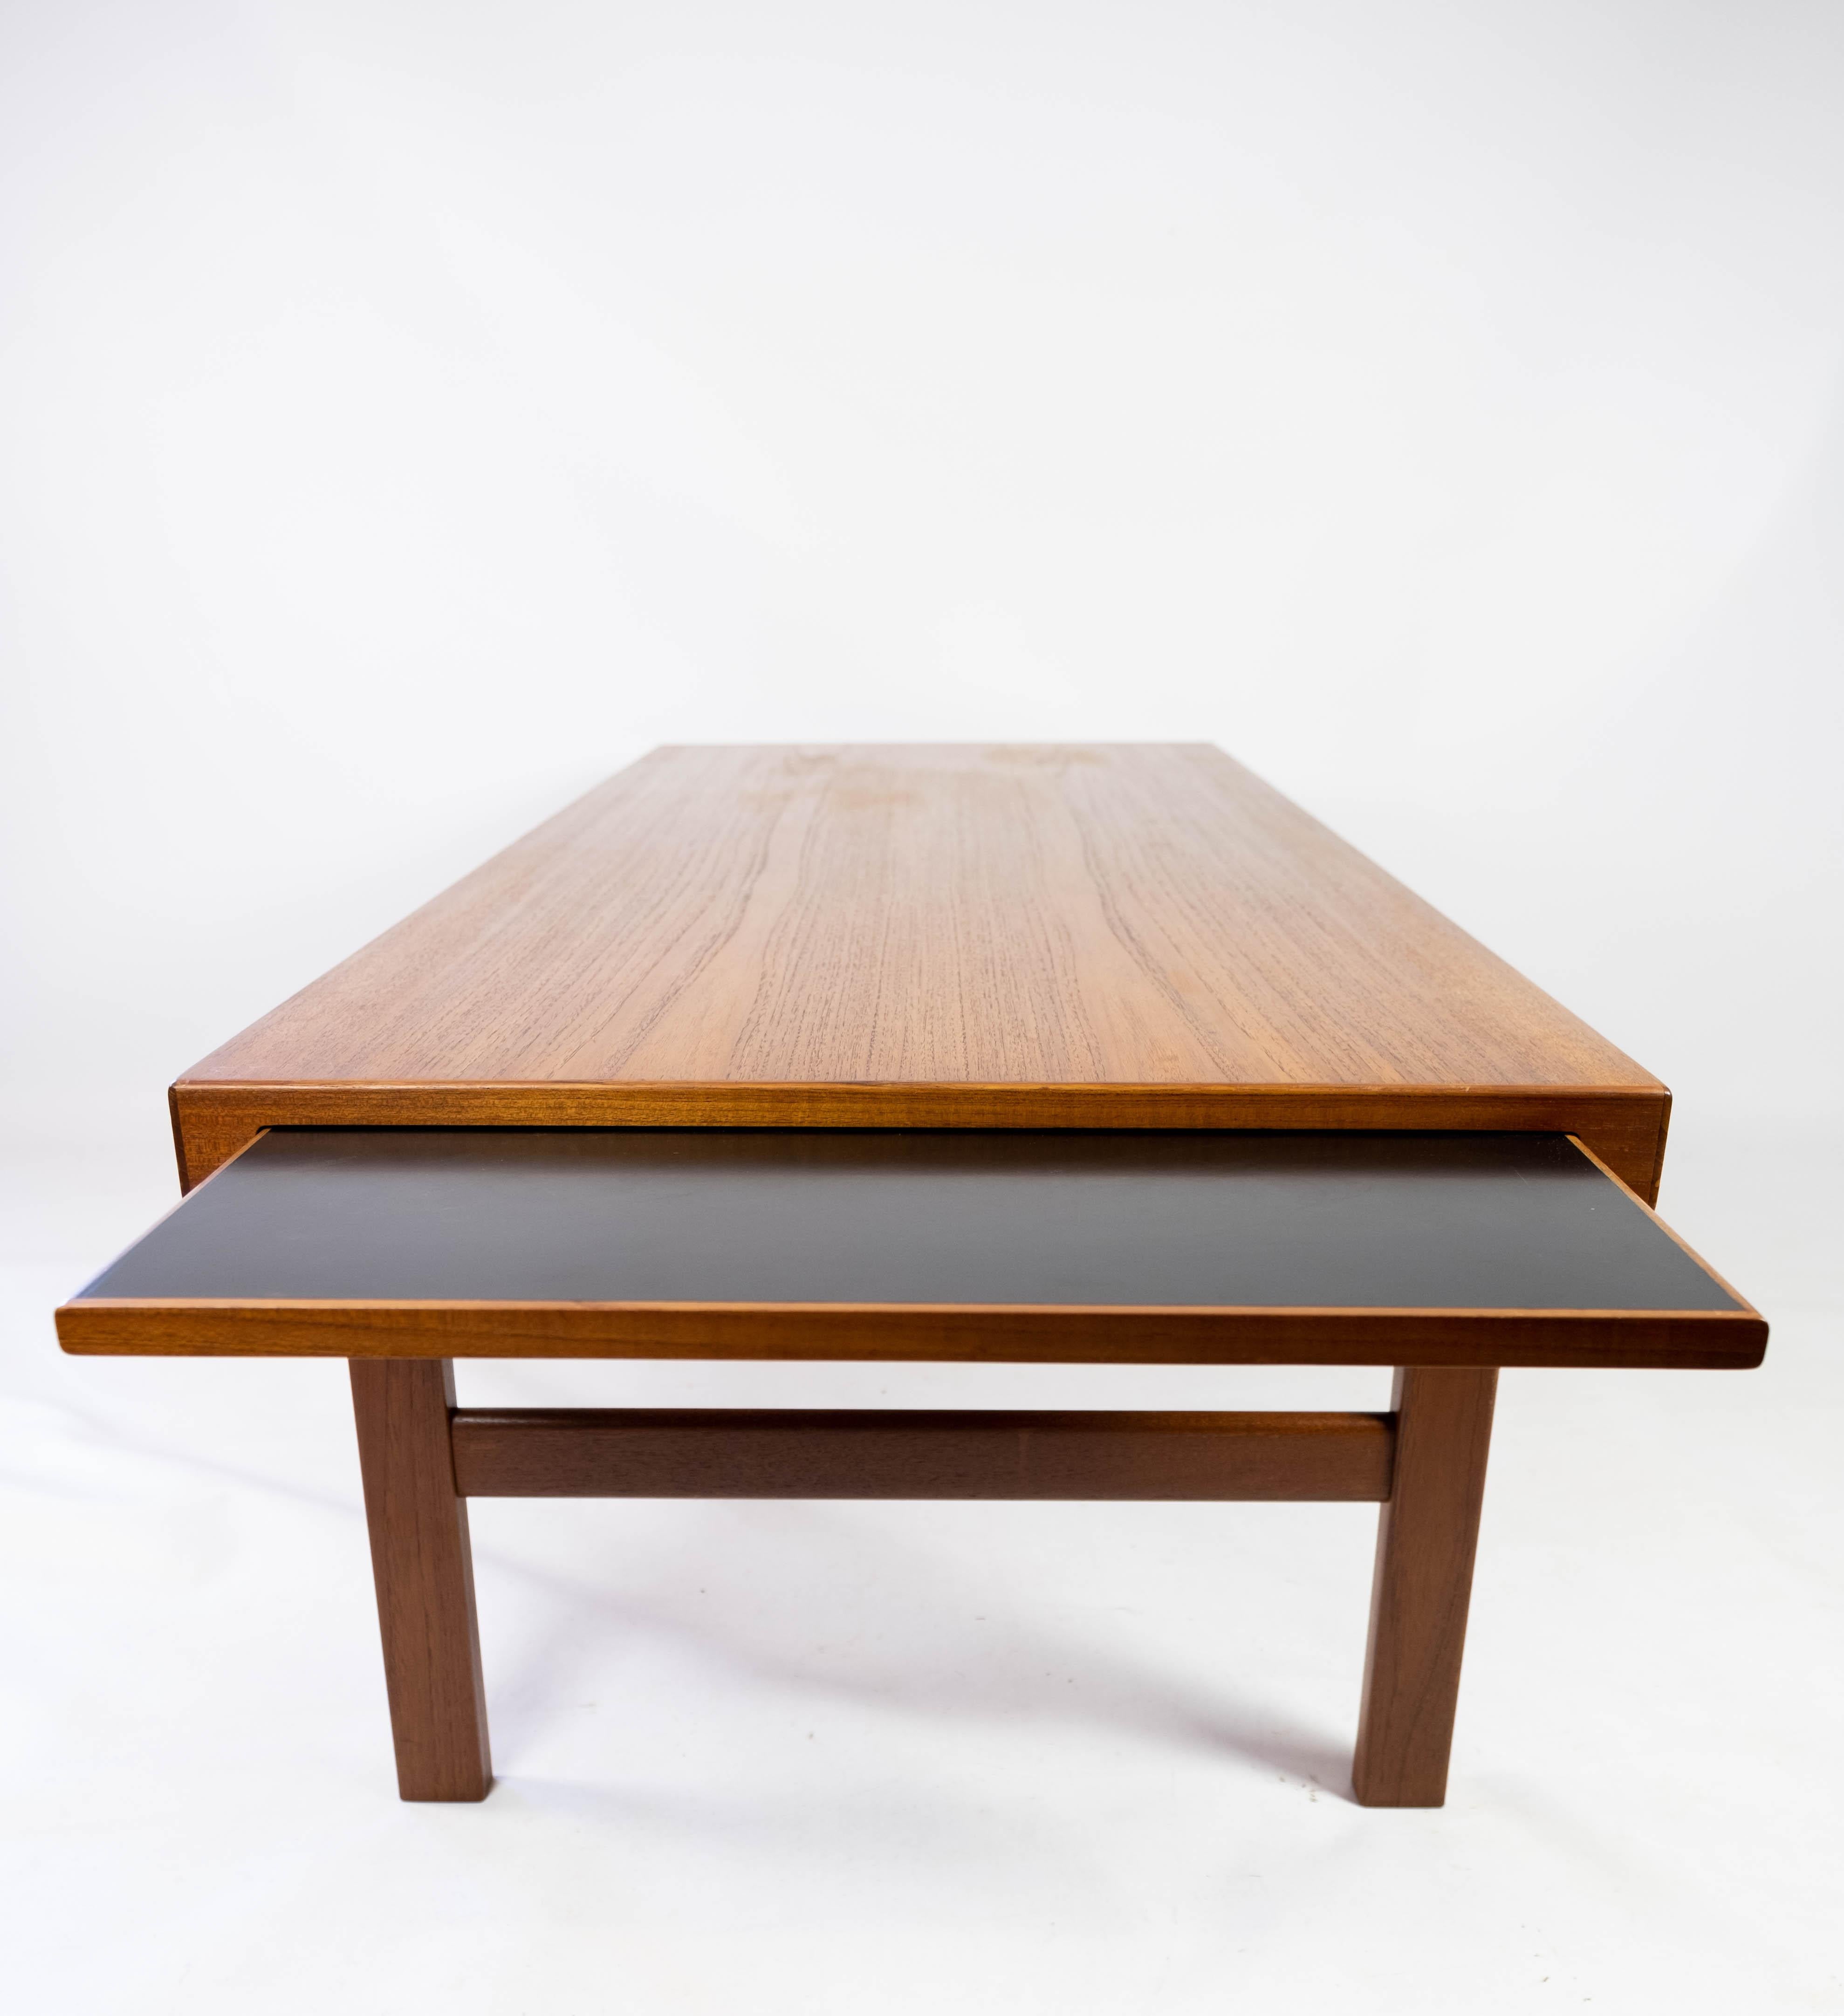 Coffee Table Made In Teak With Extension Plate, Danish Design From 1960s For Sale 4